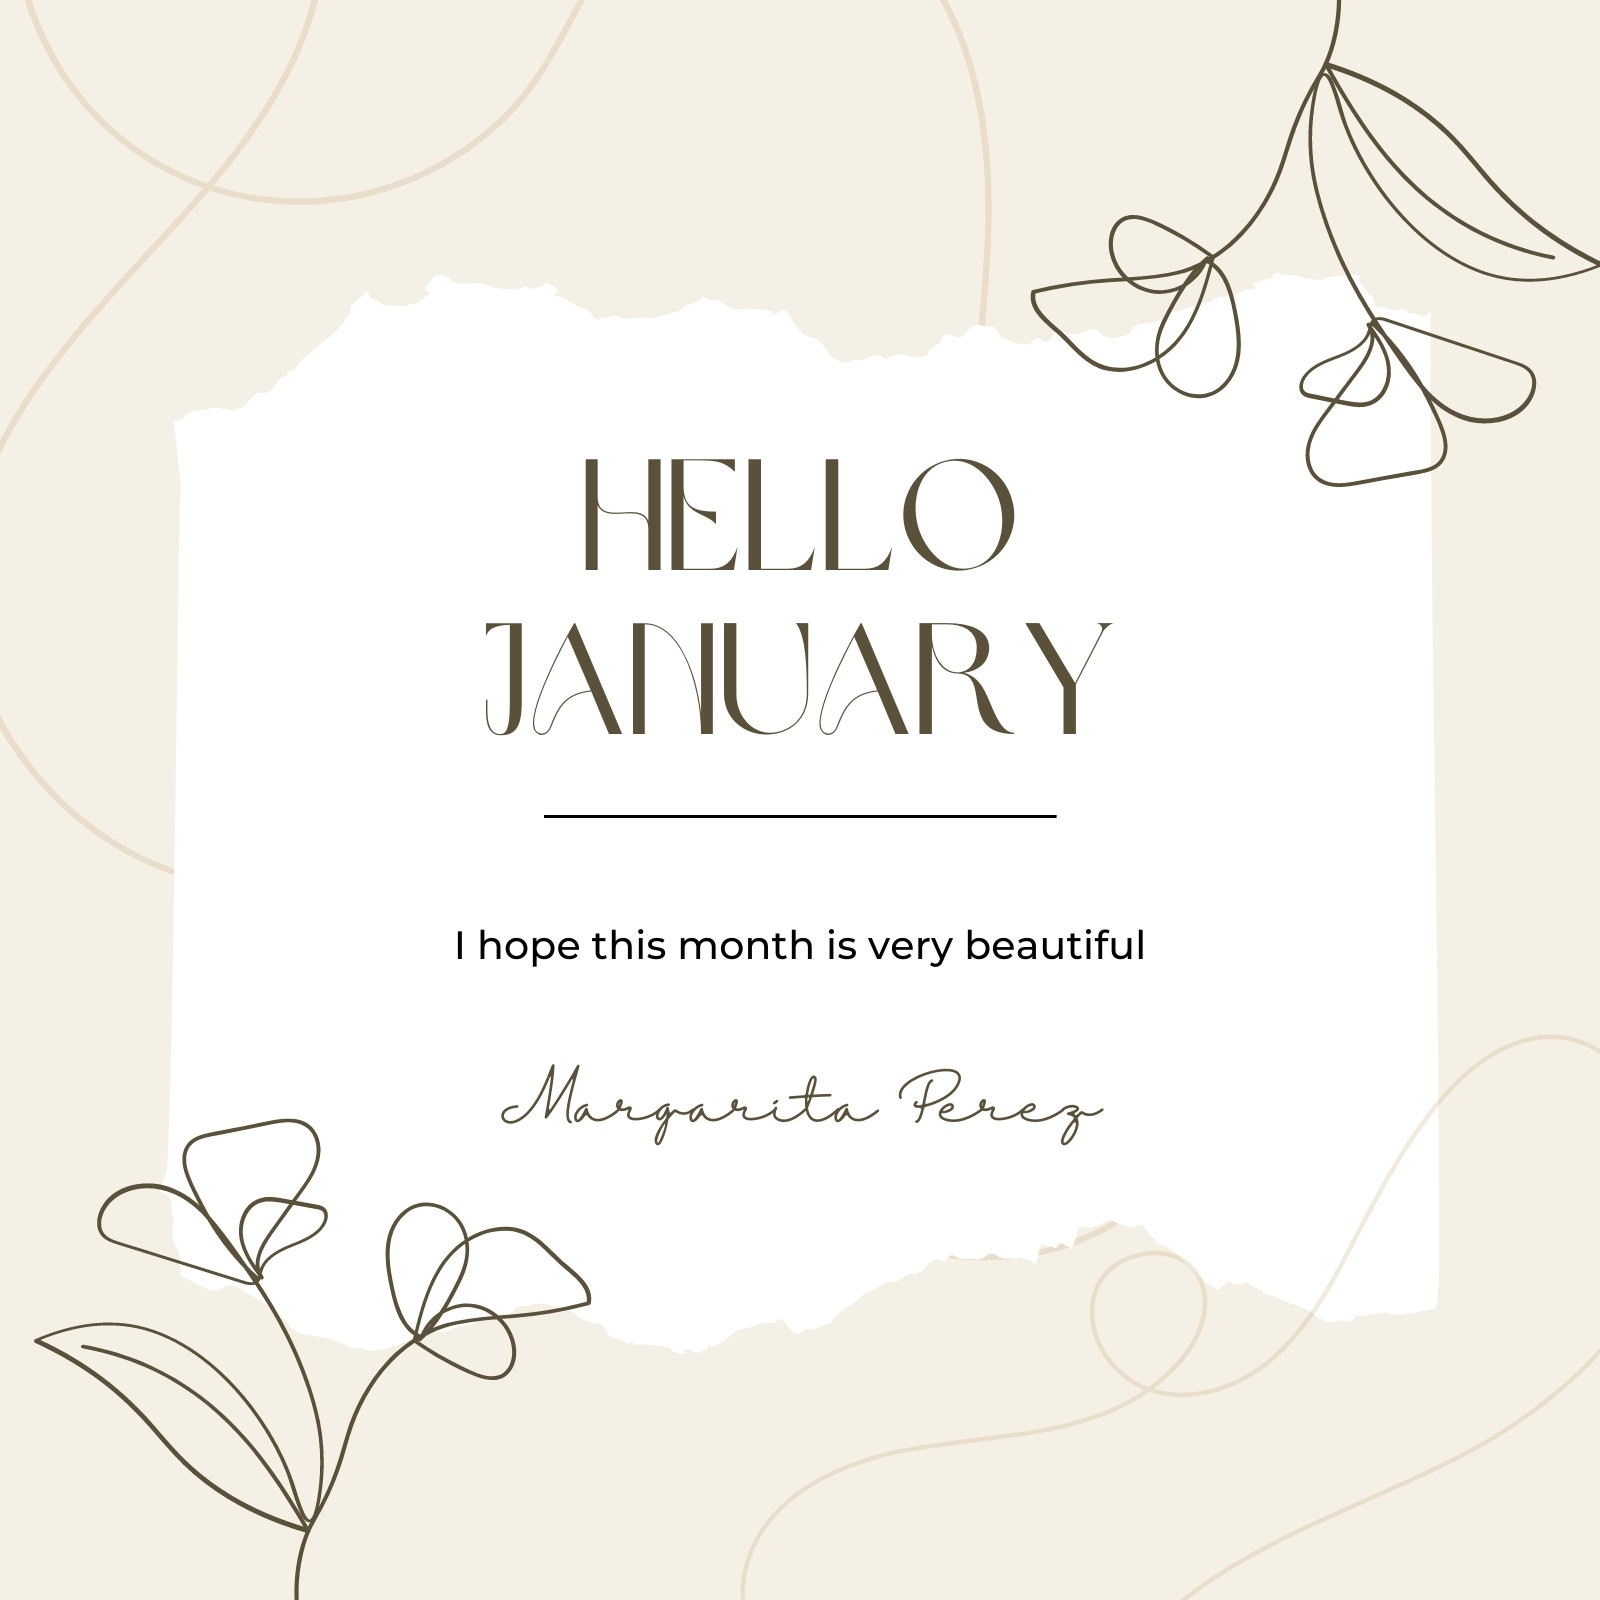 Free and customizable hello templates